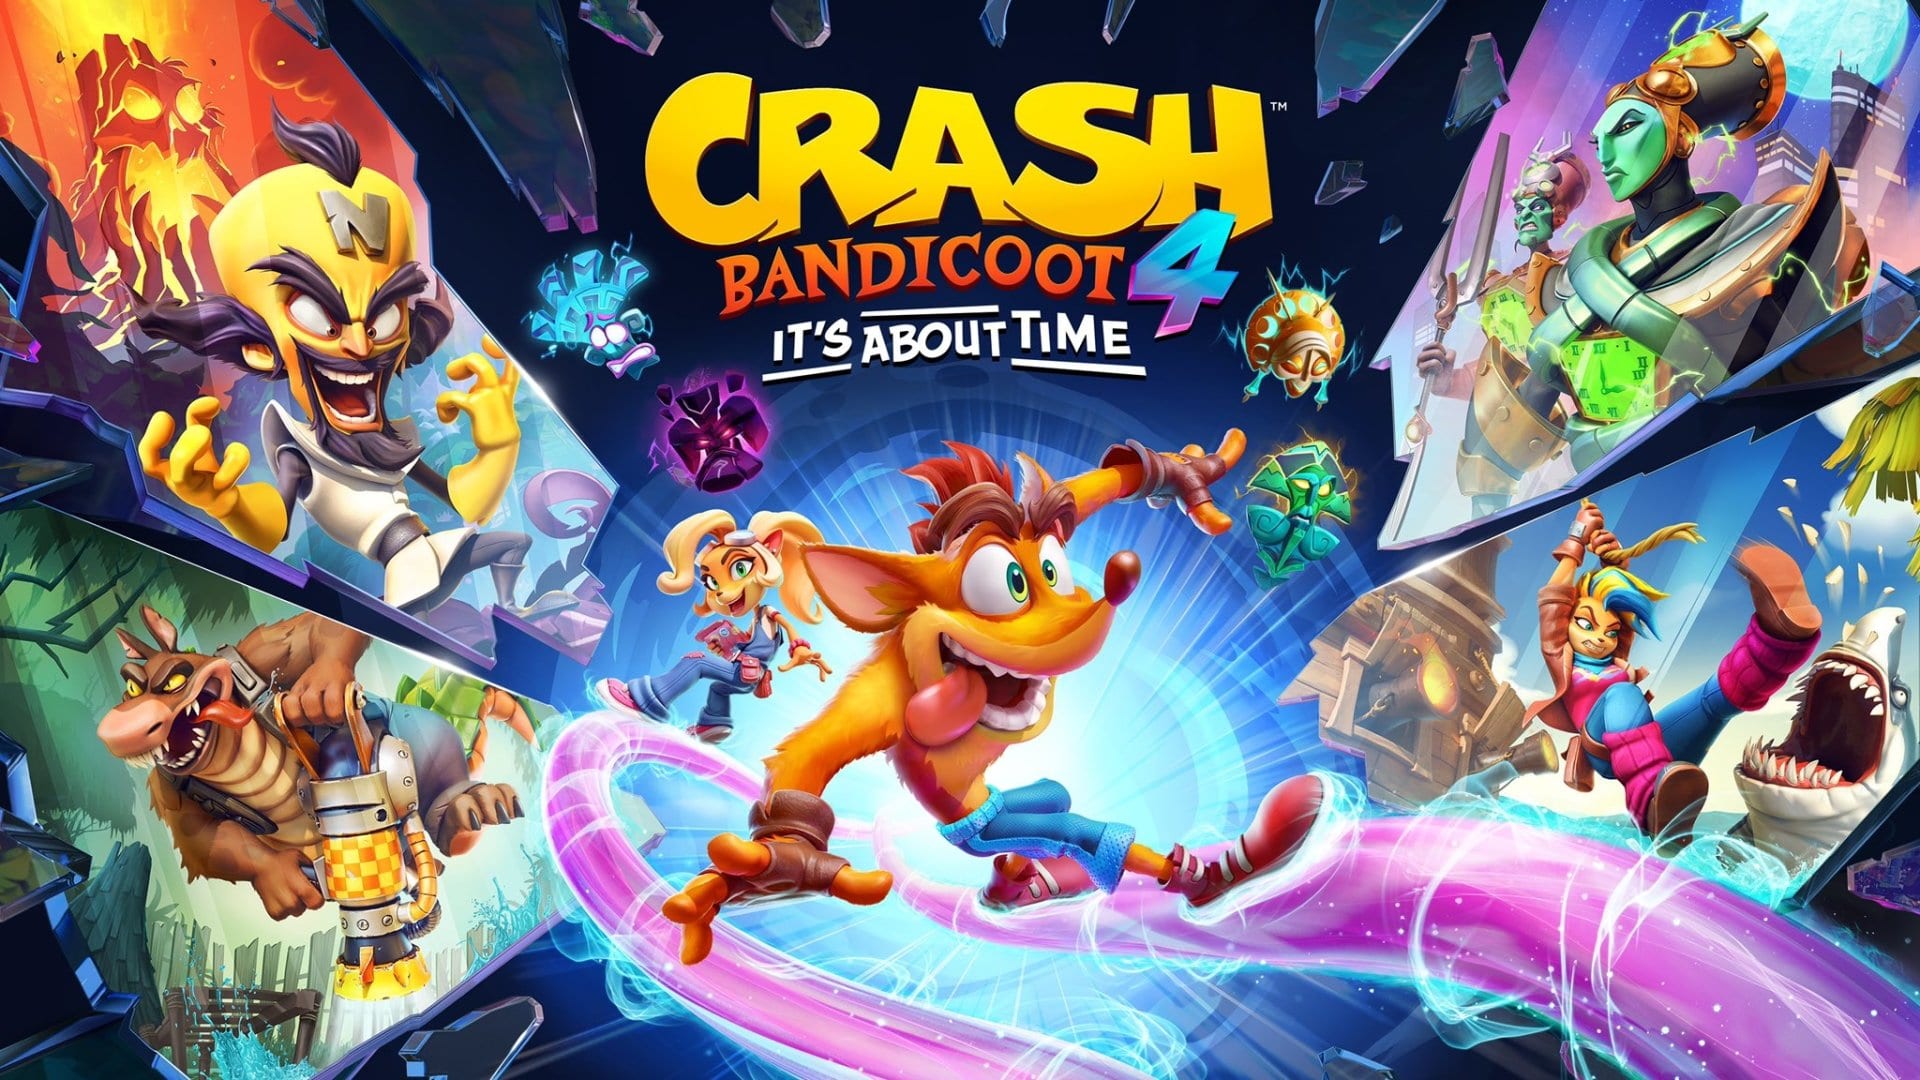 Best Crash Bandicoot 4: It's About Time Wallpapers For Your Desktop Background